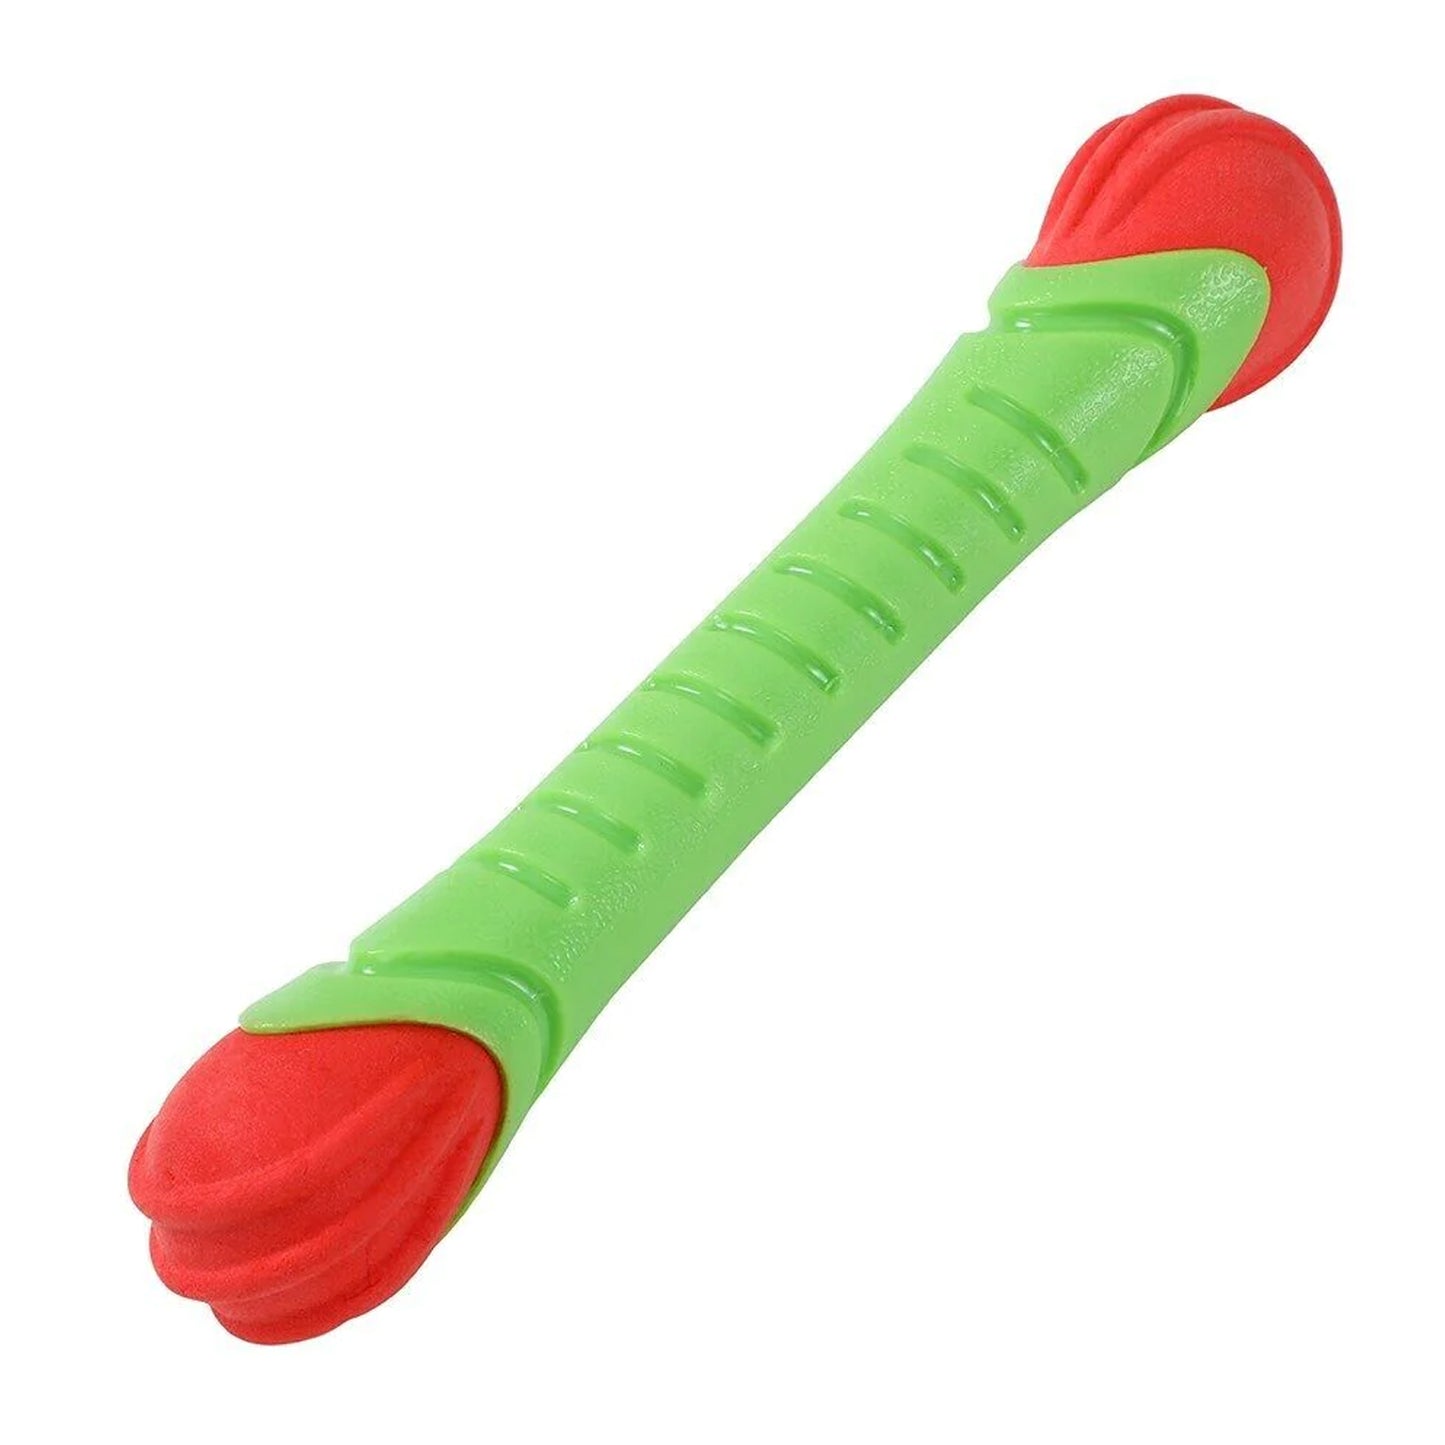 Holypaws Dura Chew Short Stick Toy With Floting TPR Squeaker Baton